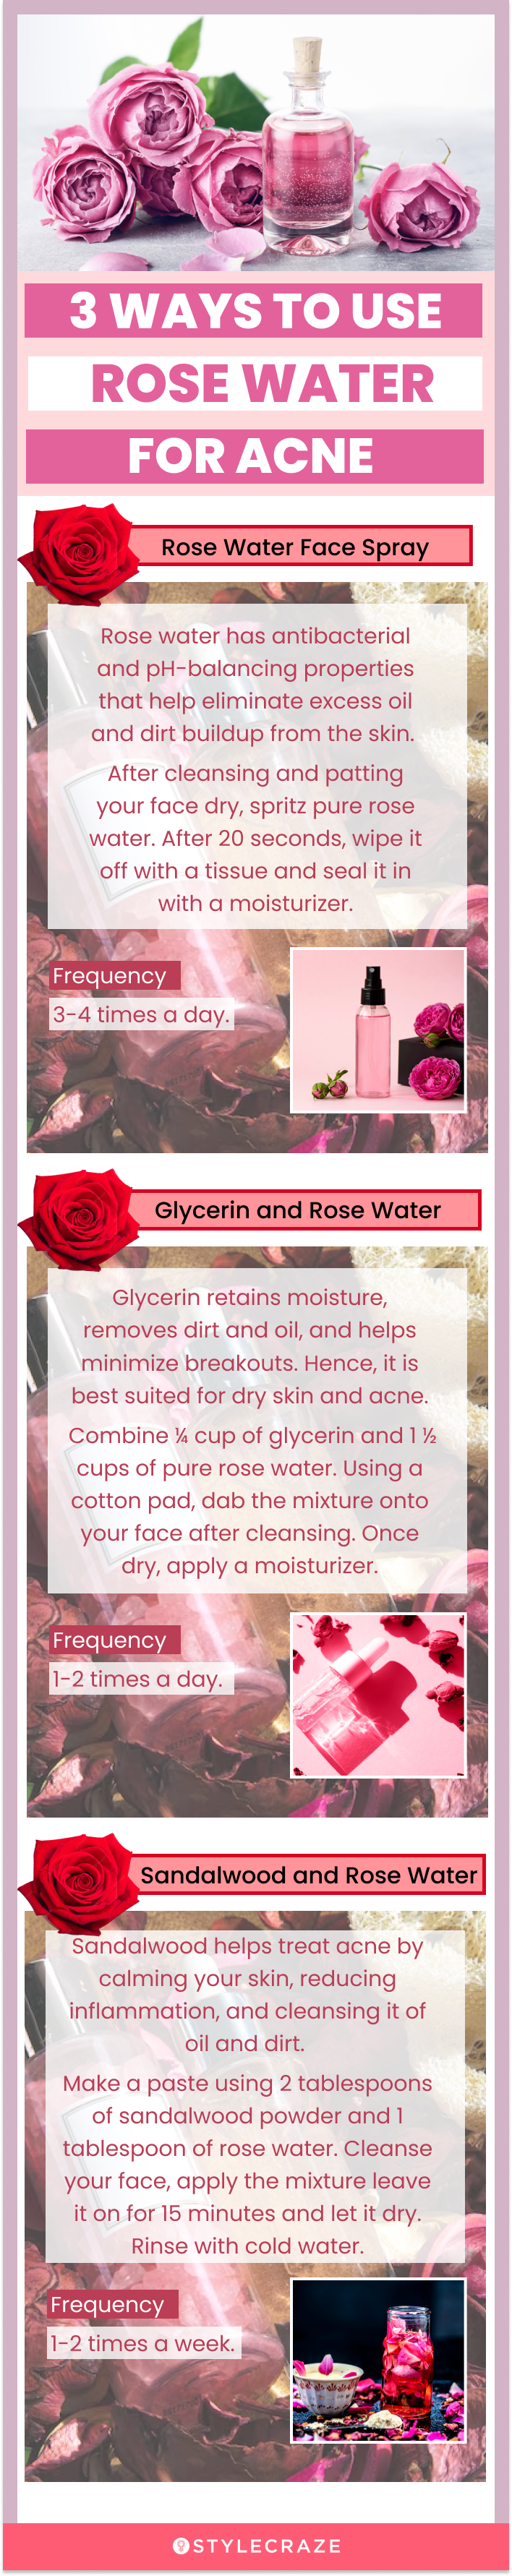 3 ways to use rose water for acne (infographic)